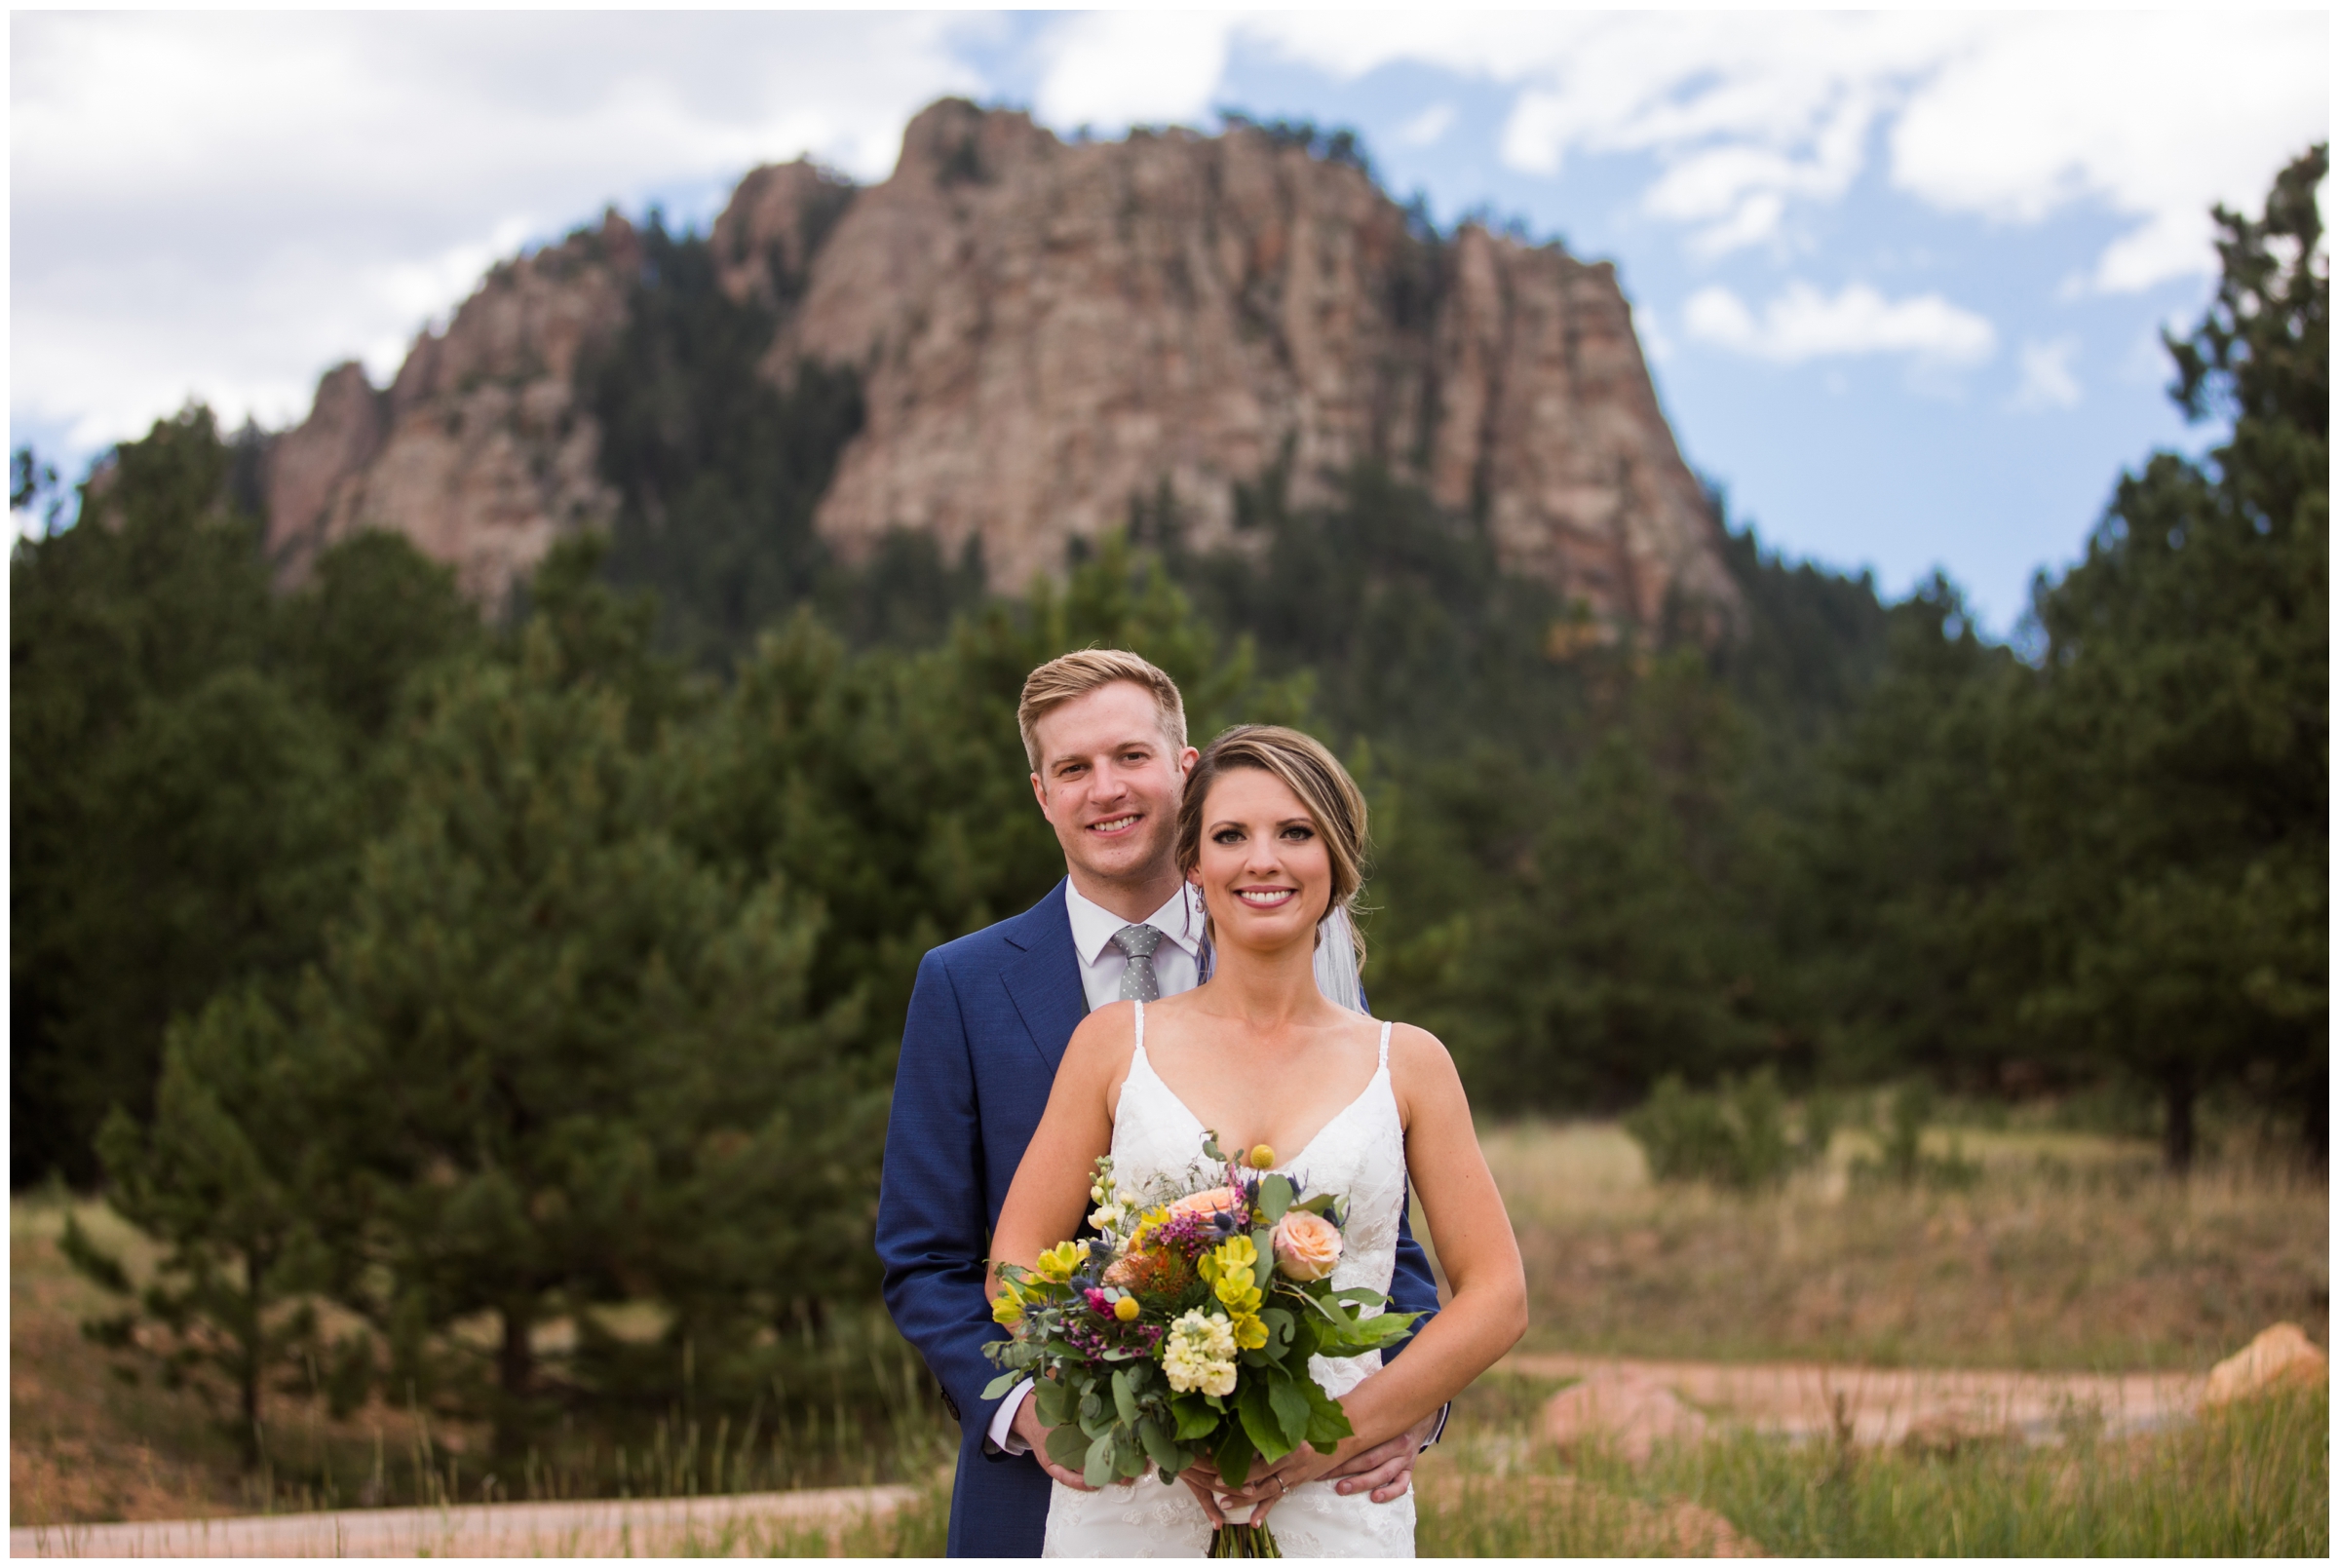 Colorado mountain wedding photography inspiration at Wedgewood Mountain View Ranch